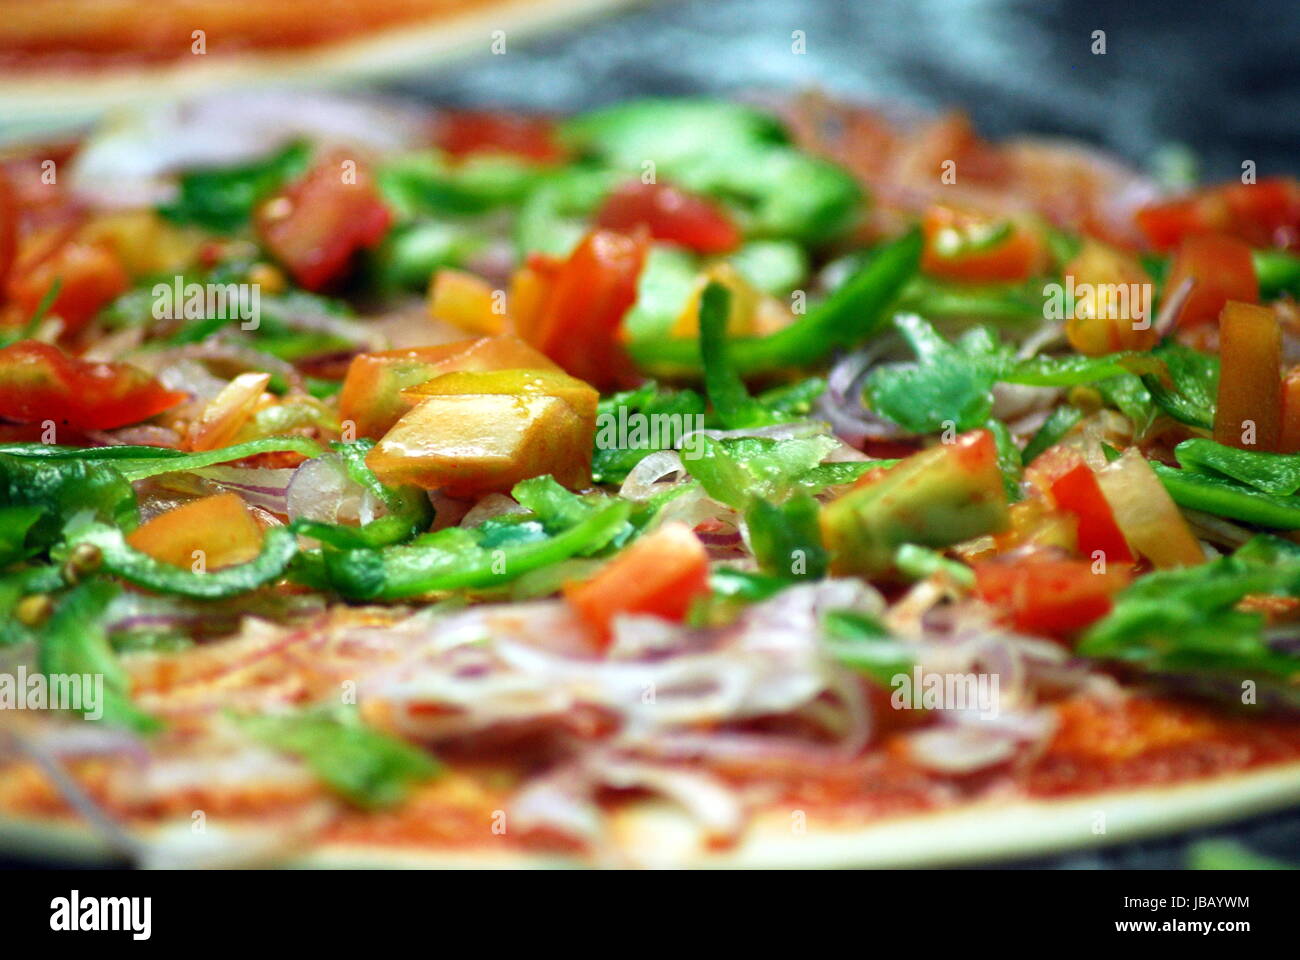 Indian Pizza Stock Photo